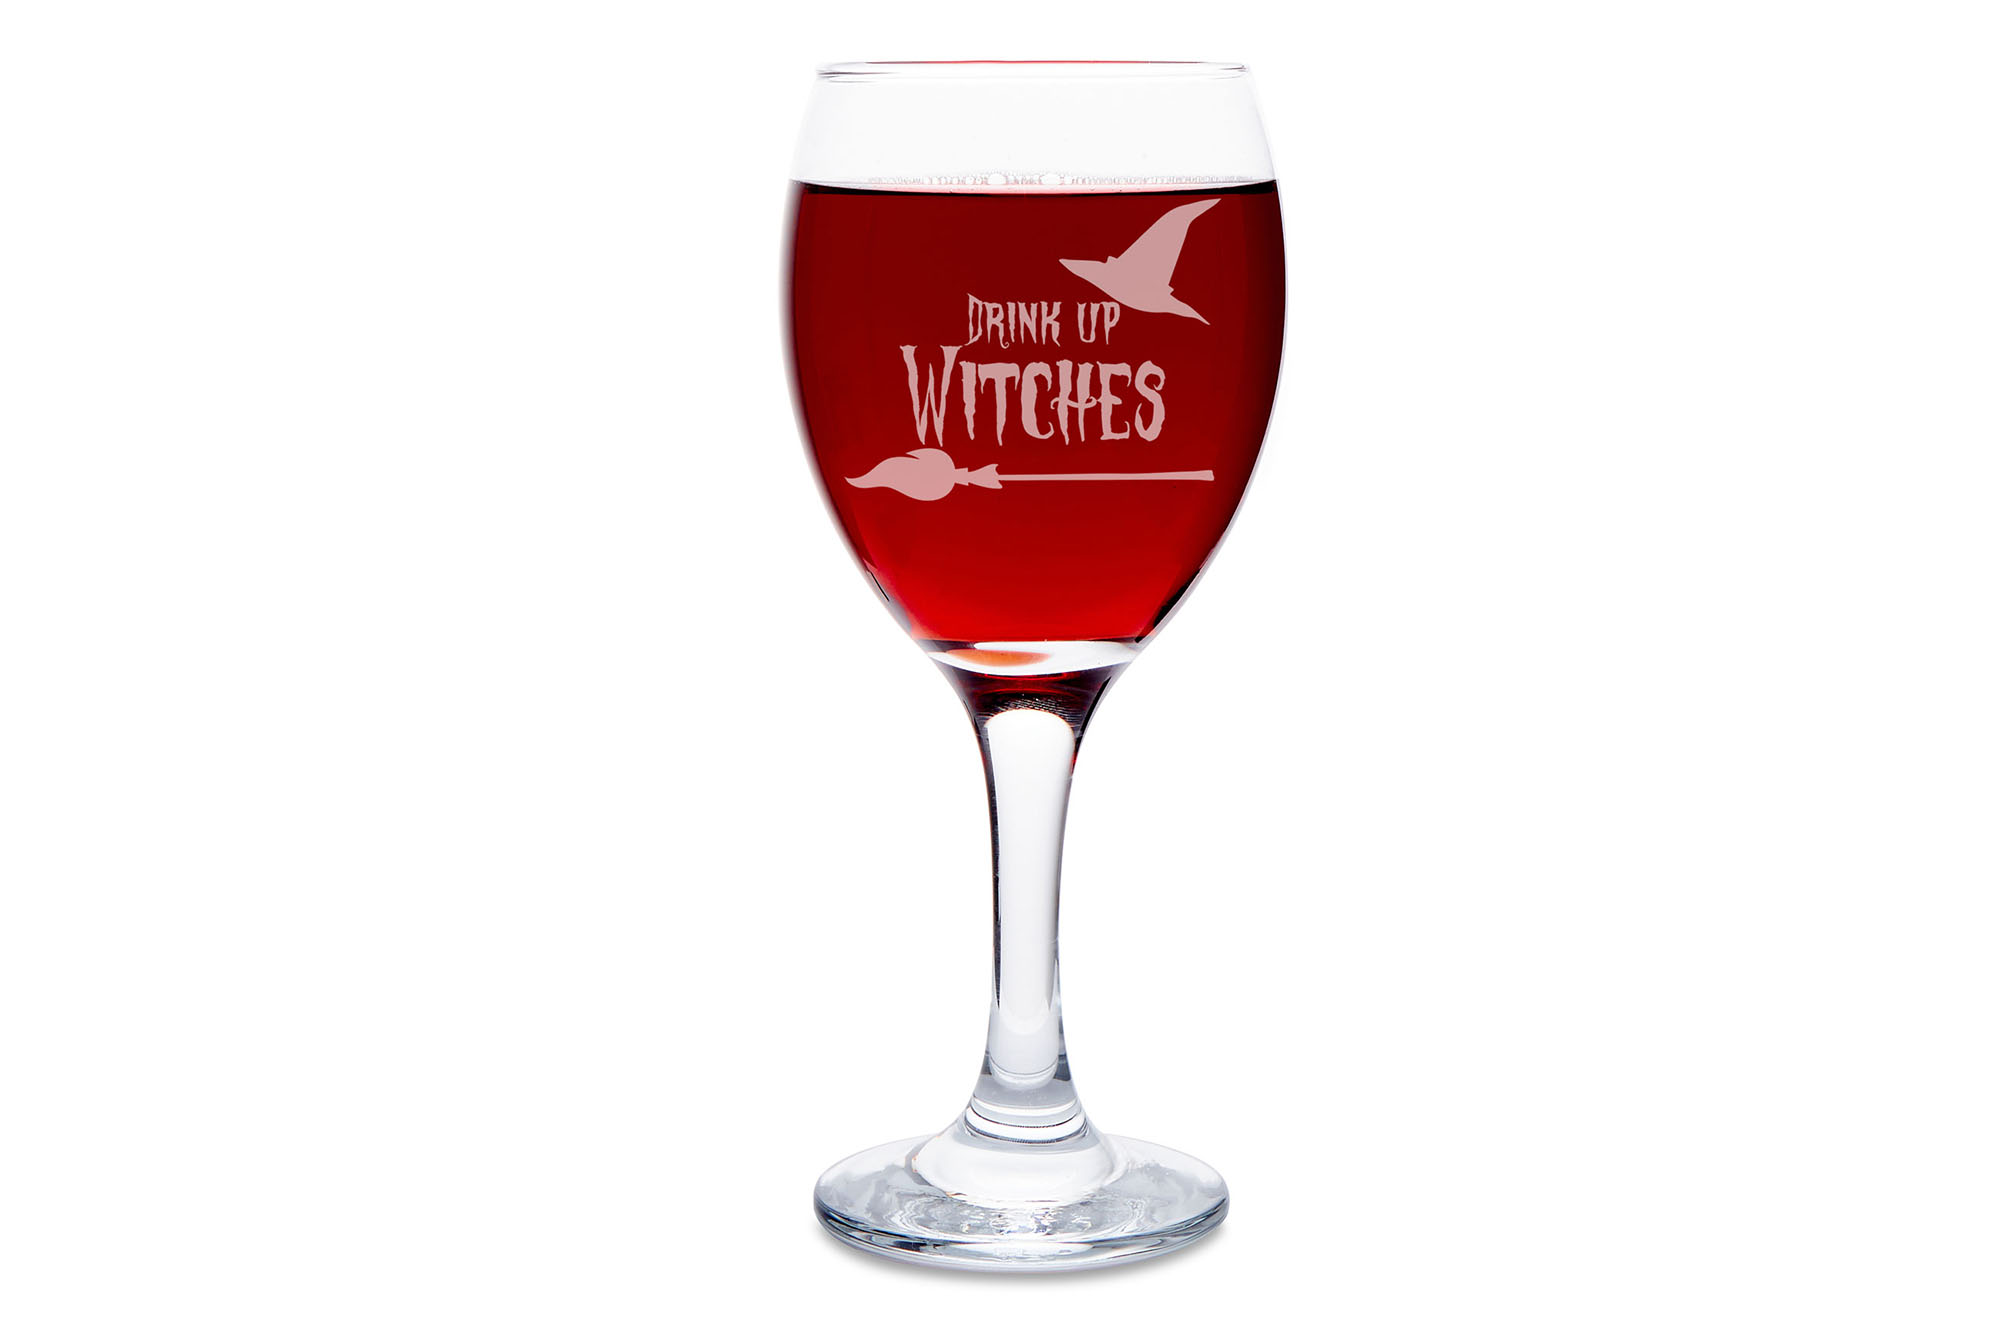 Drink up witches wine glass